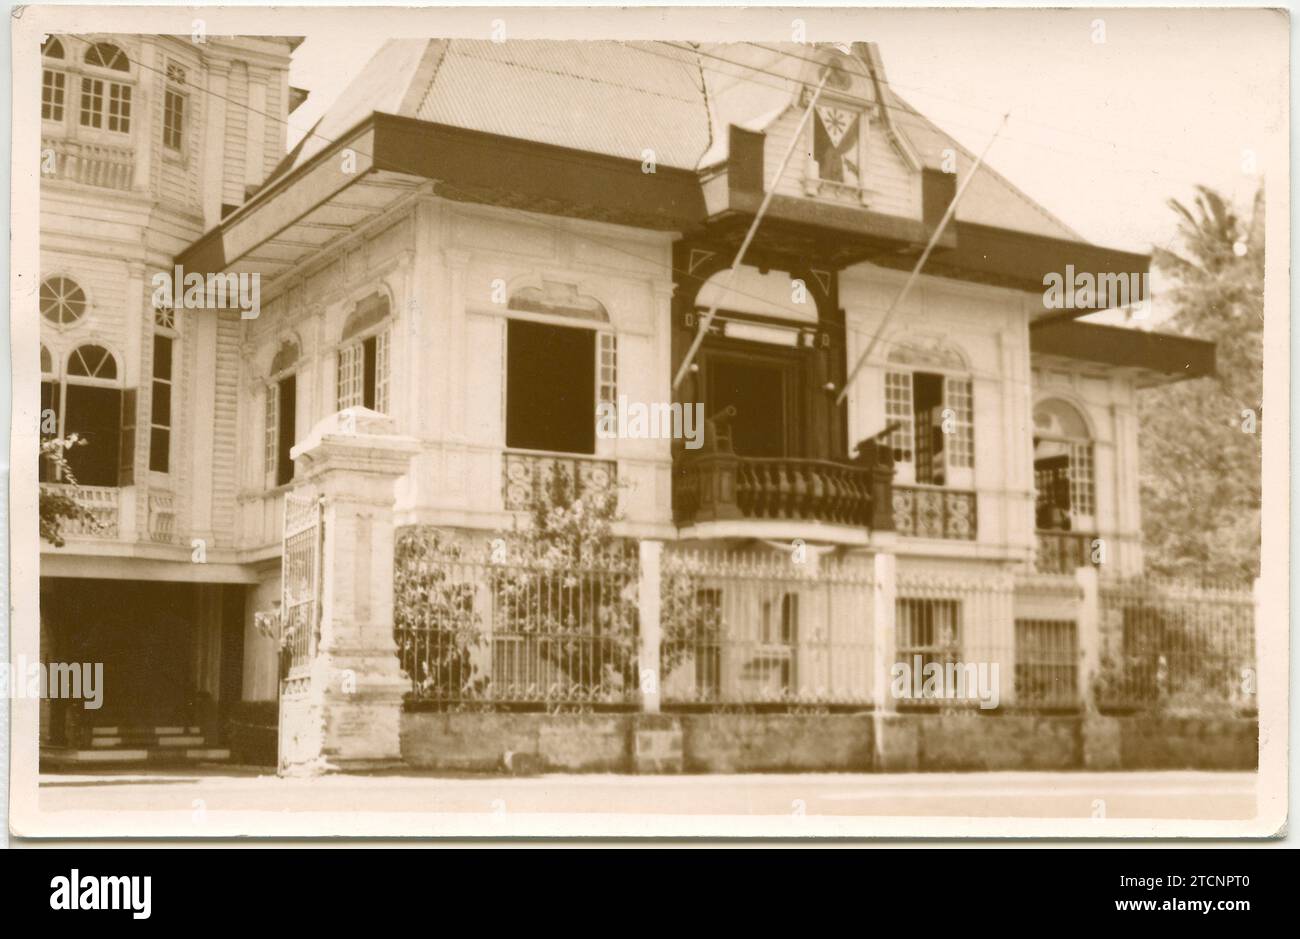 Kawit (Cavite, Philippines), January 1962. The house of General Emilio Aguinaldo, where you can see the historic balcony with the two cannons, where on June 23, 1896 the first Philippine Republic was declared. Credit: Album / Archivo ABC Stock Photo